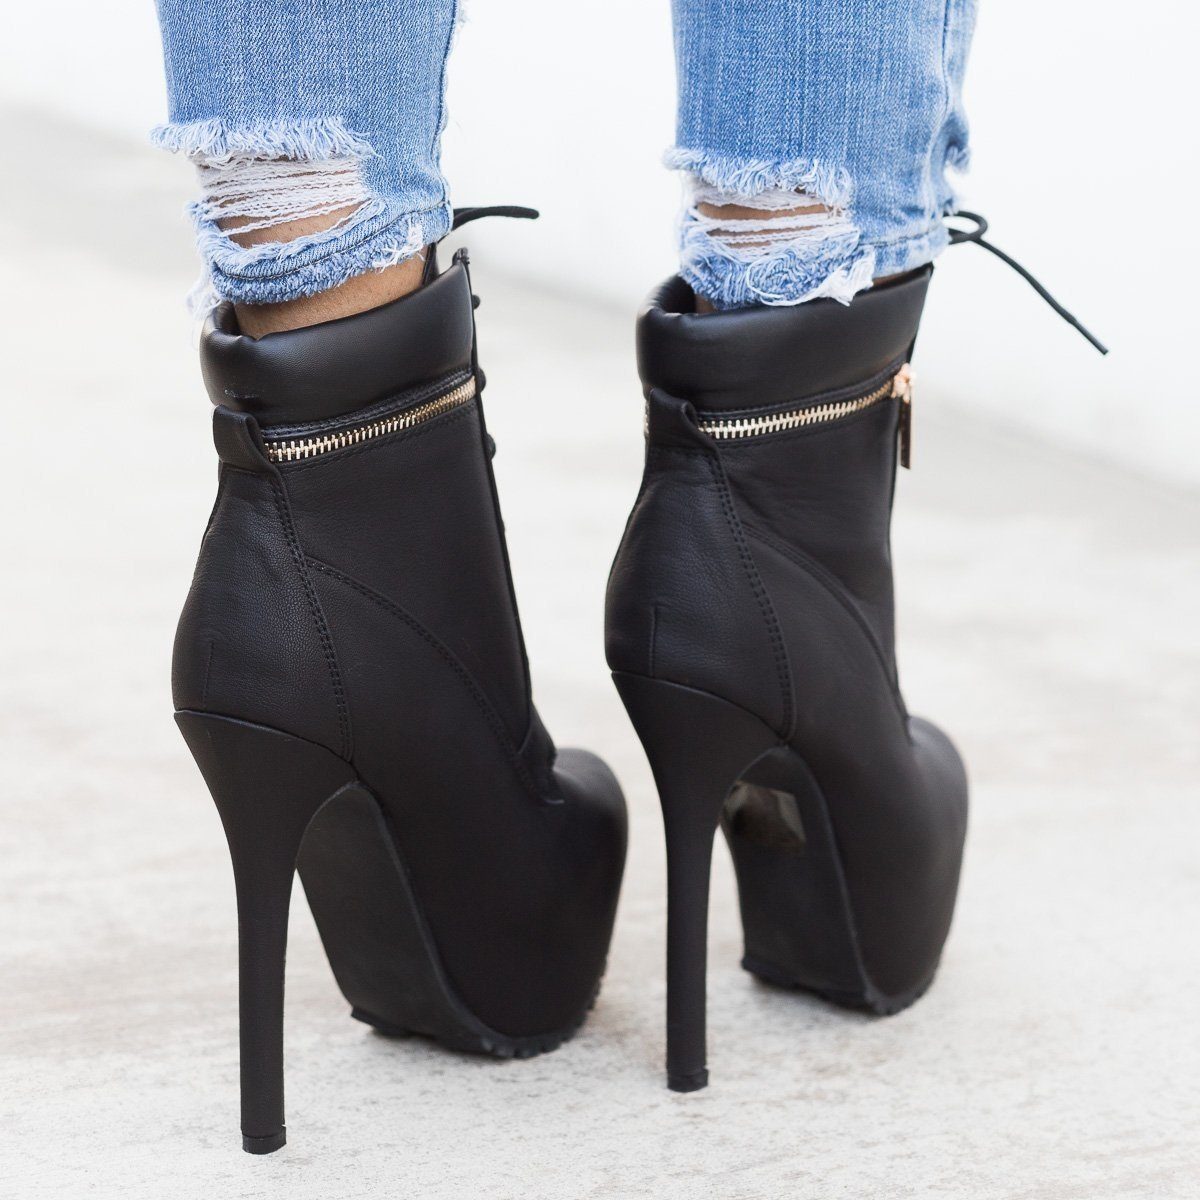 Edgy Lace-Up Platform Ankle Boots Bella 